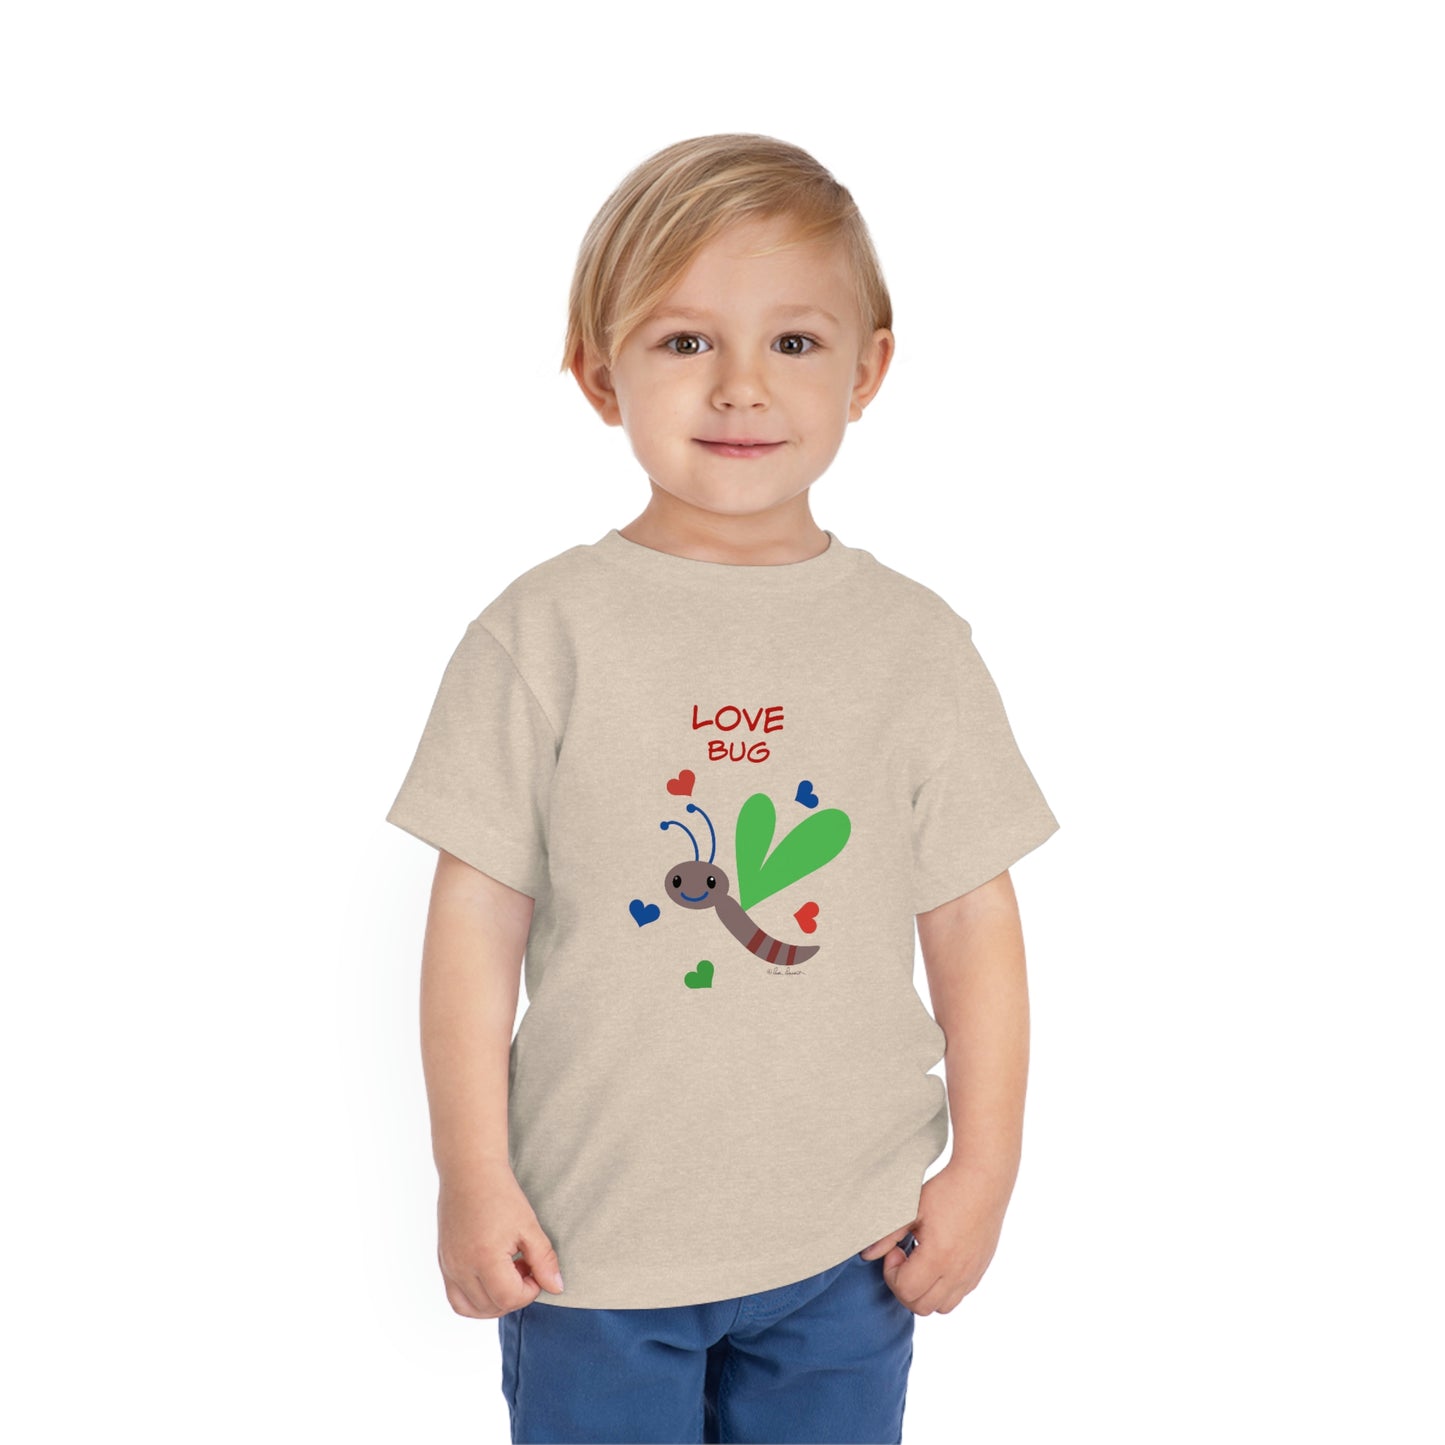 Mock up of a child wearing our Heather Dust t-shirt